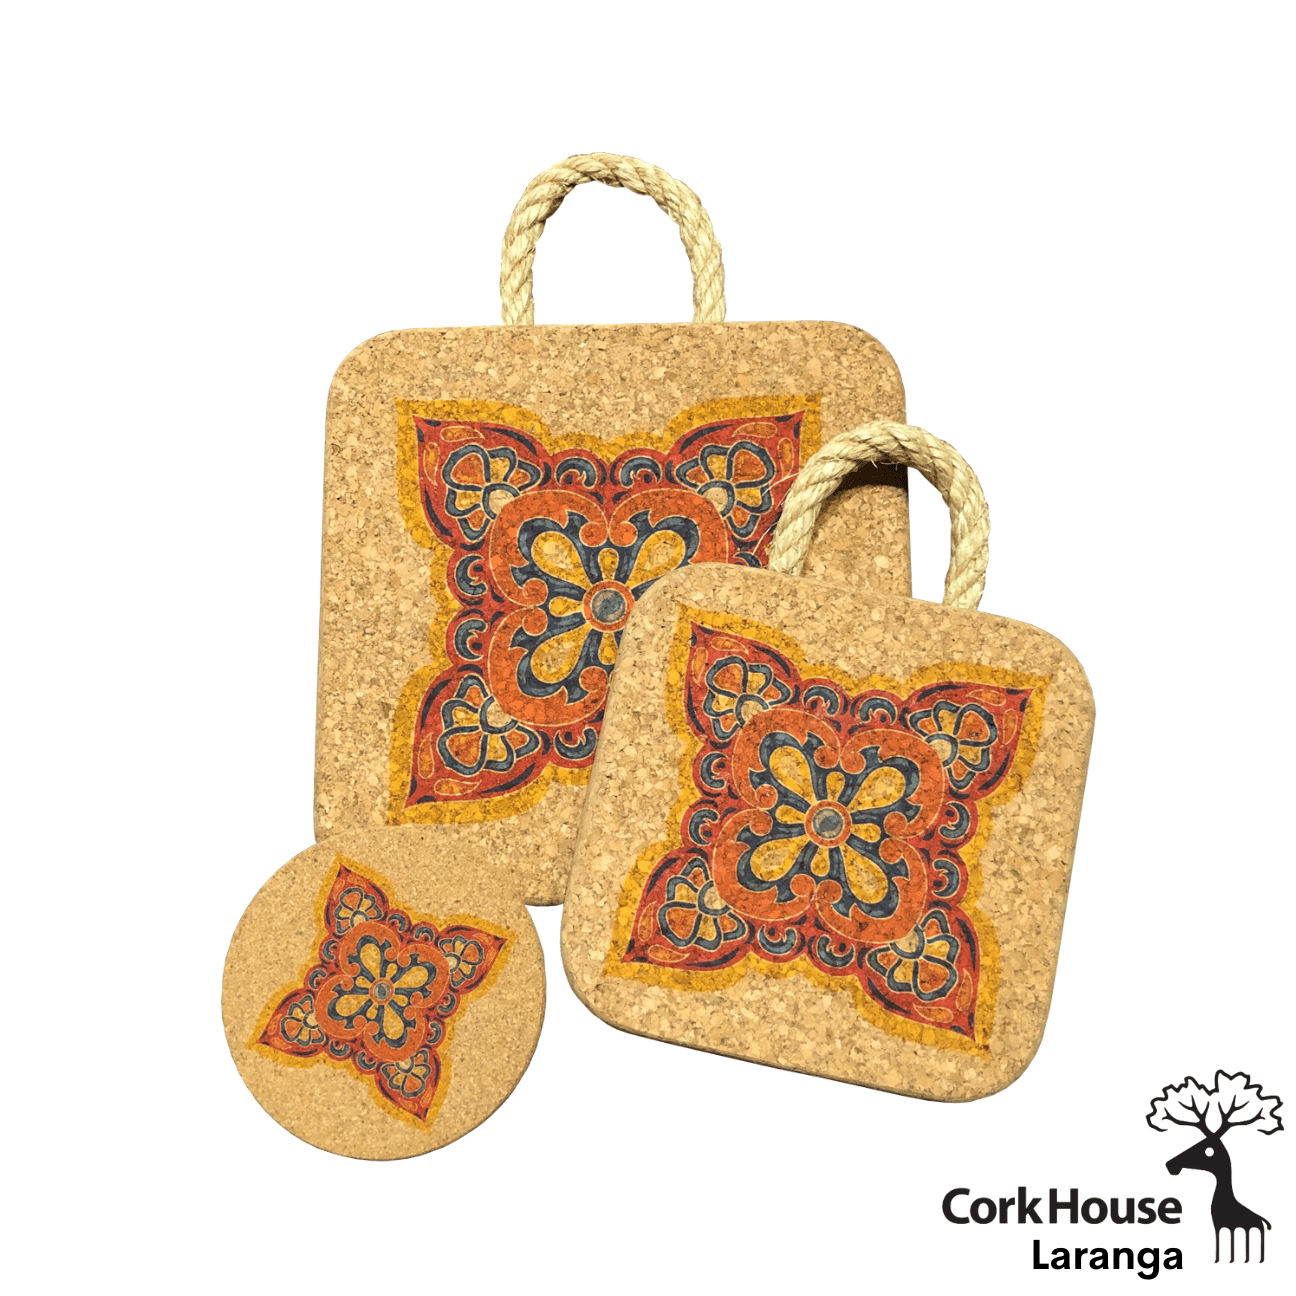 The 8in hot pad, 6in hot pad and coaster from the laranga collection feature rich warm colors in an intricate geometric pattern.